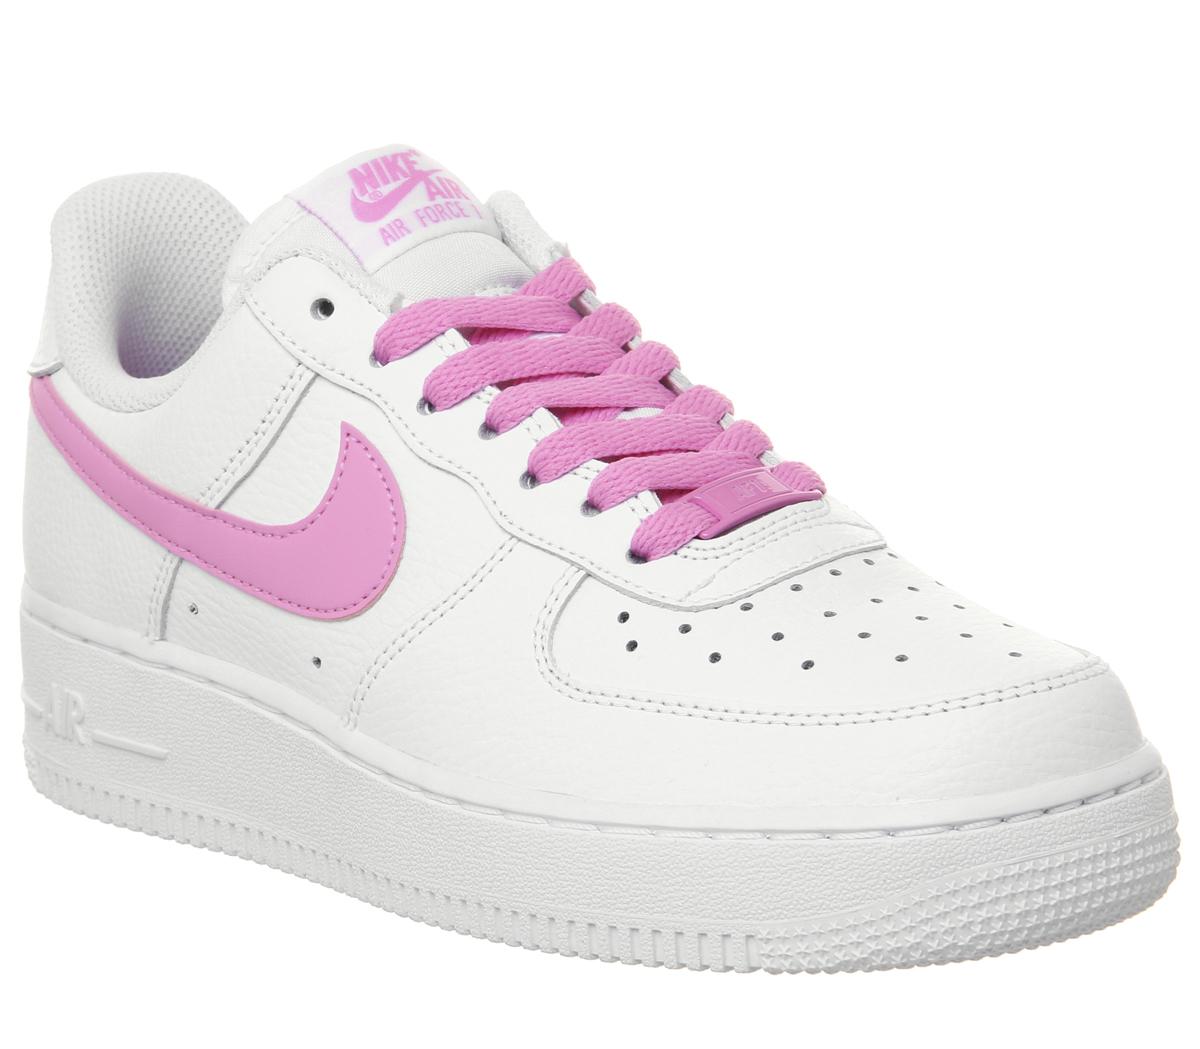 Nike Air Force 1 '07 Trainers White Psychic Pink - Hers trainers